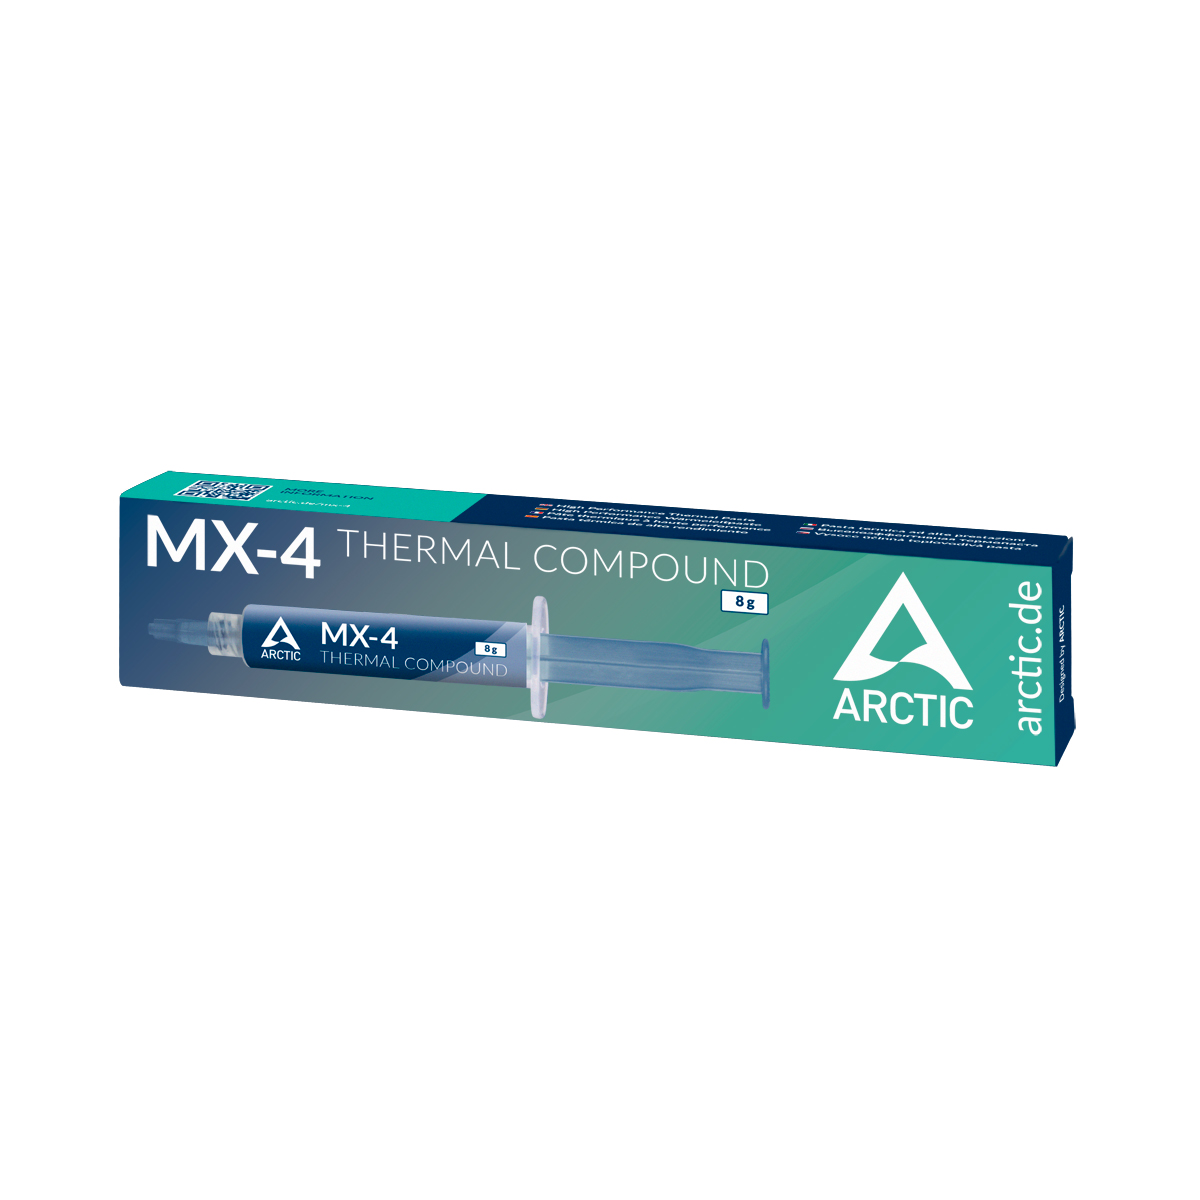 ARCTIC MX-4 Thermal Paste, Carbon Based High Performance Thermal Compound  for All Coolers, Thermal Interface Material, 8 Grams 